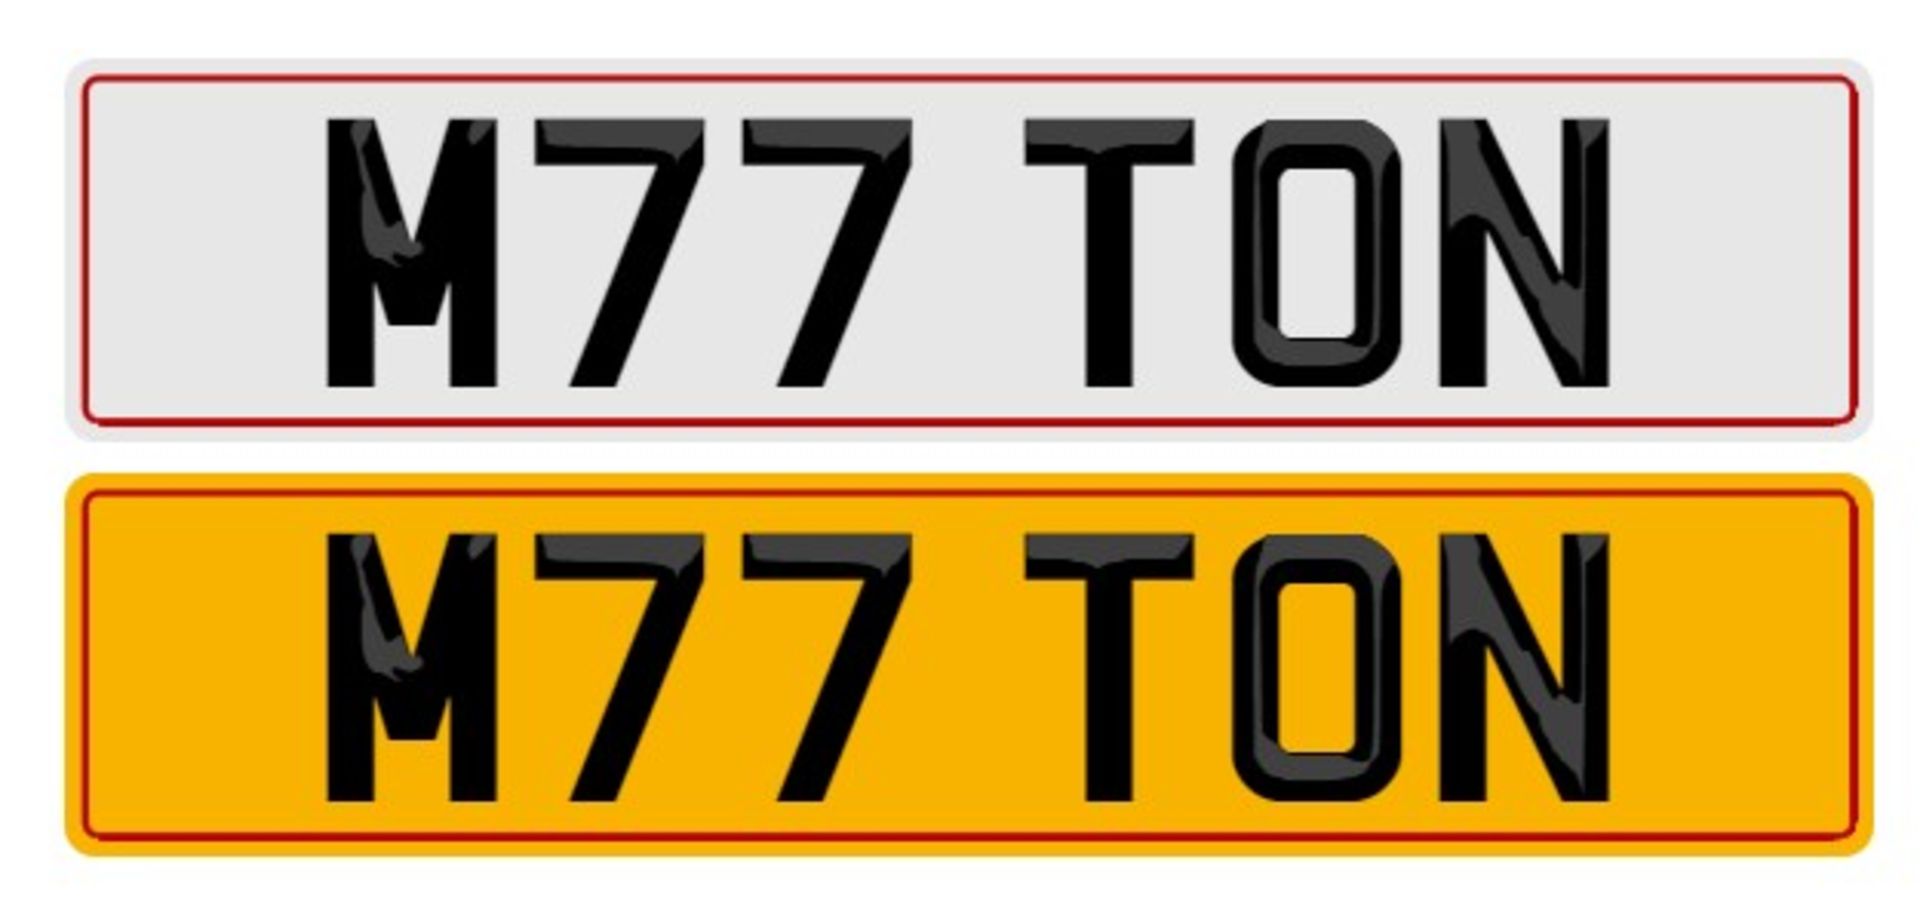 Cherished registration number.: M77TON An administration fee of £80 + VAT will be added to the